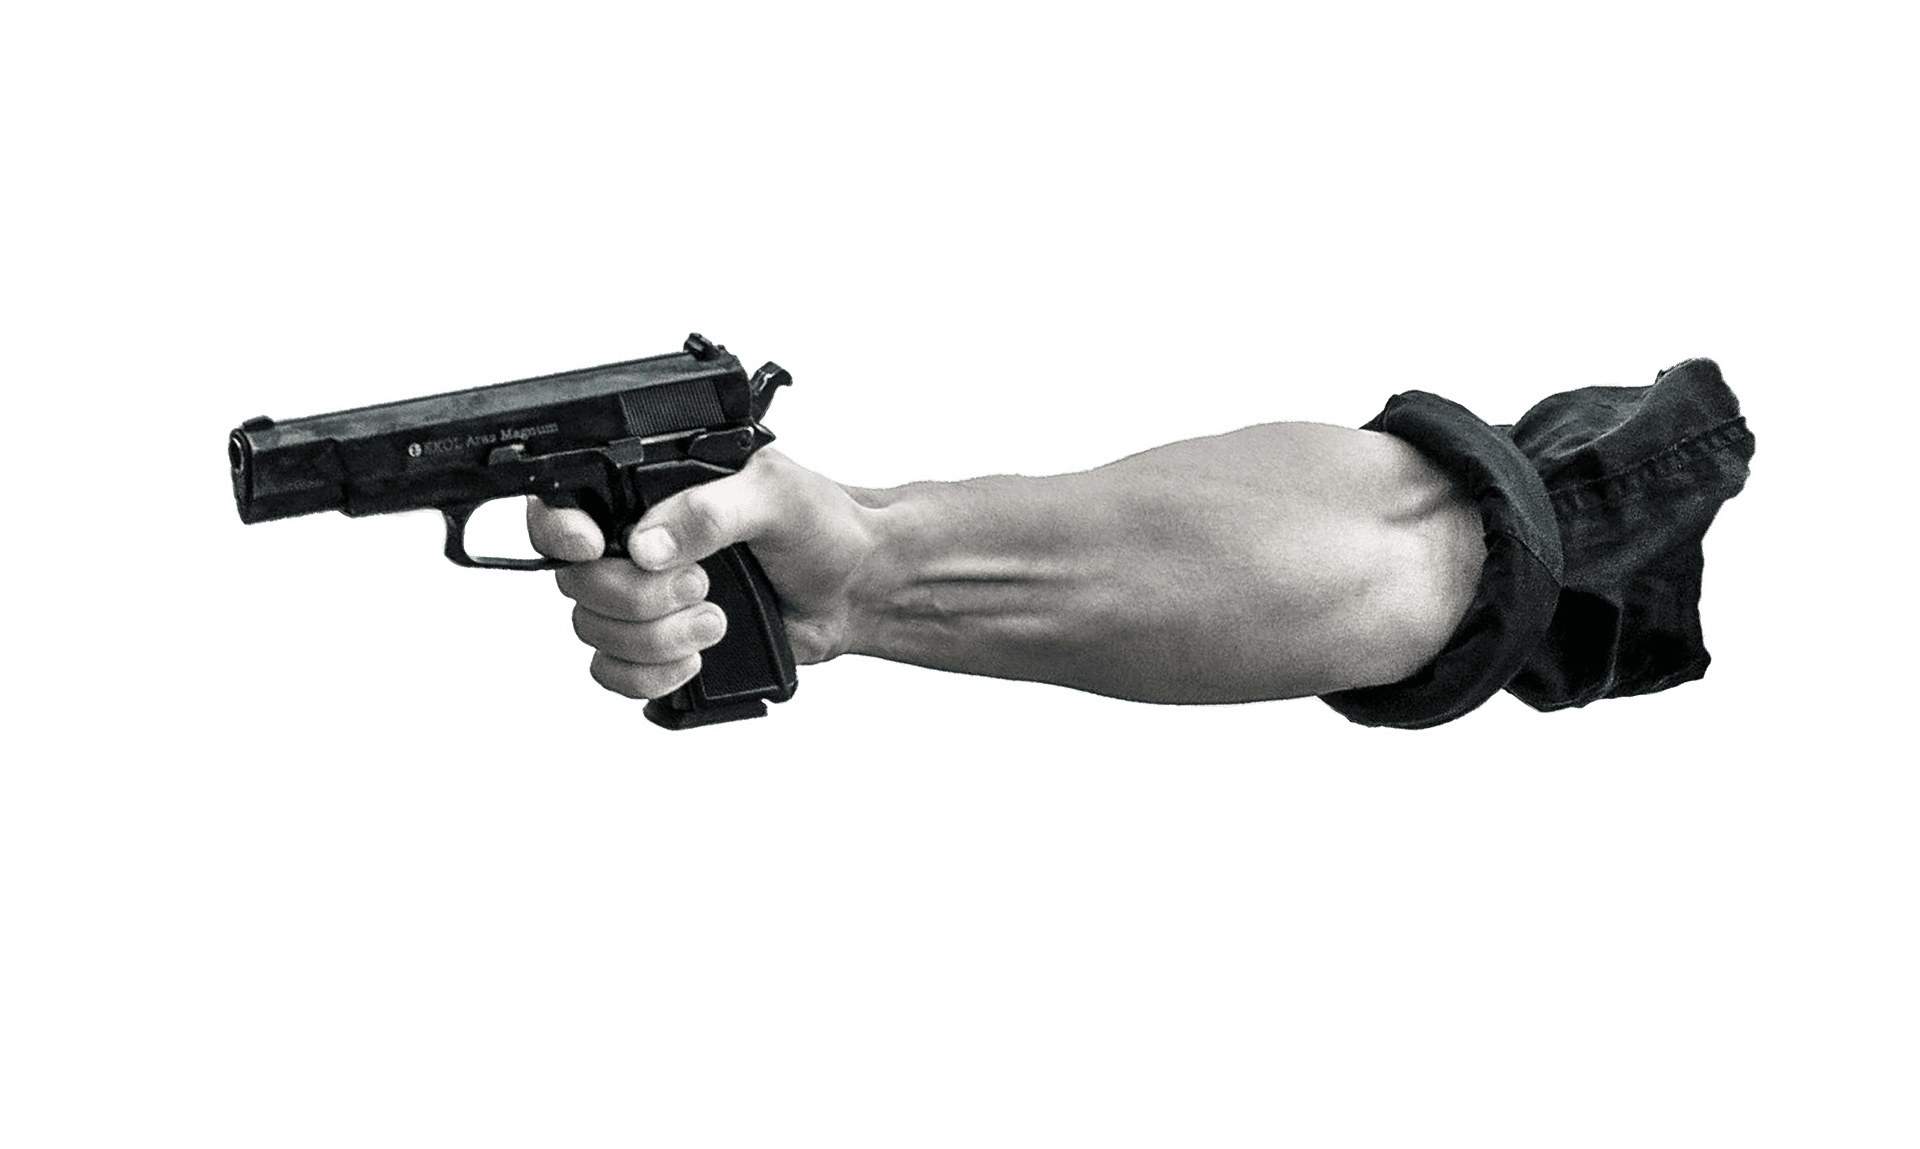 Picture showing a man pointing a gun | Source: Pixabay